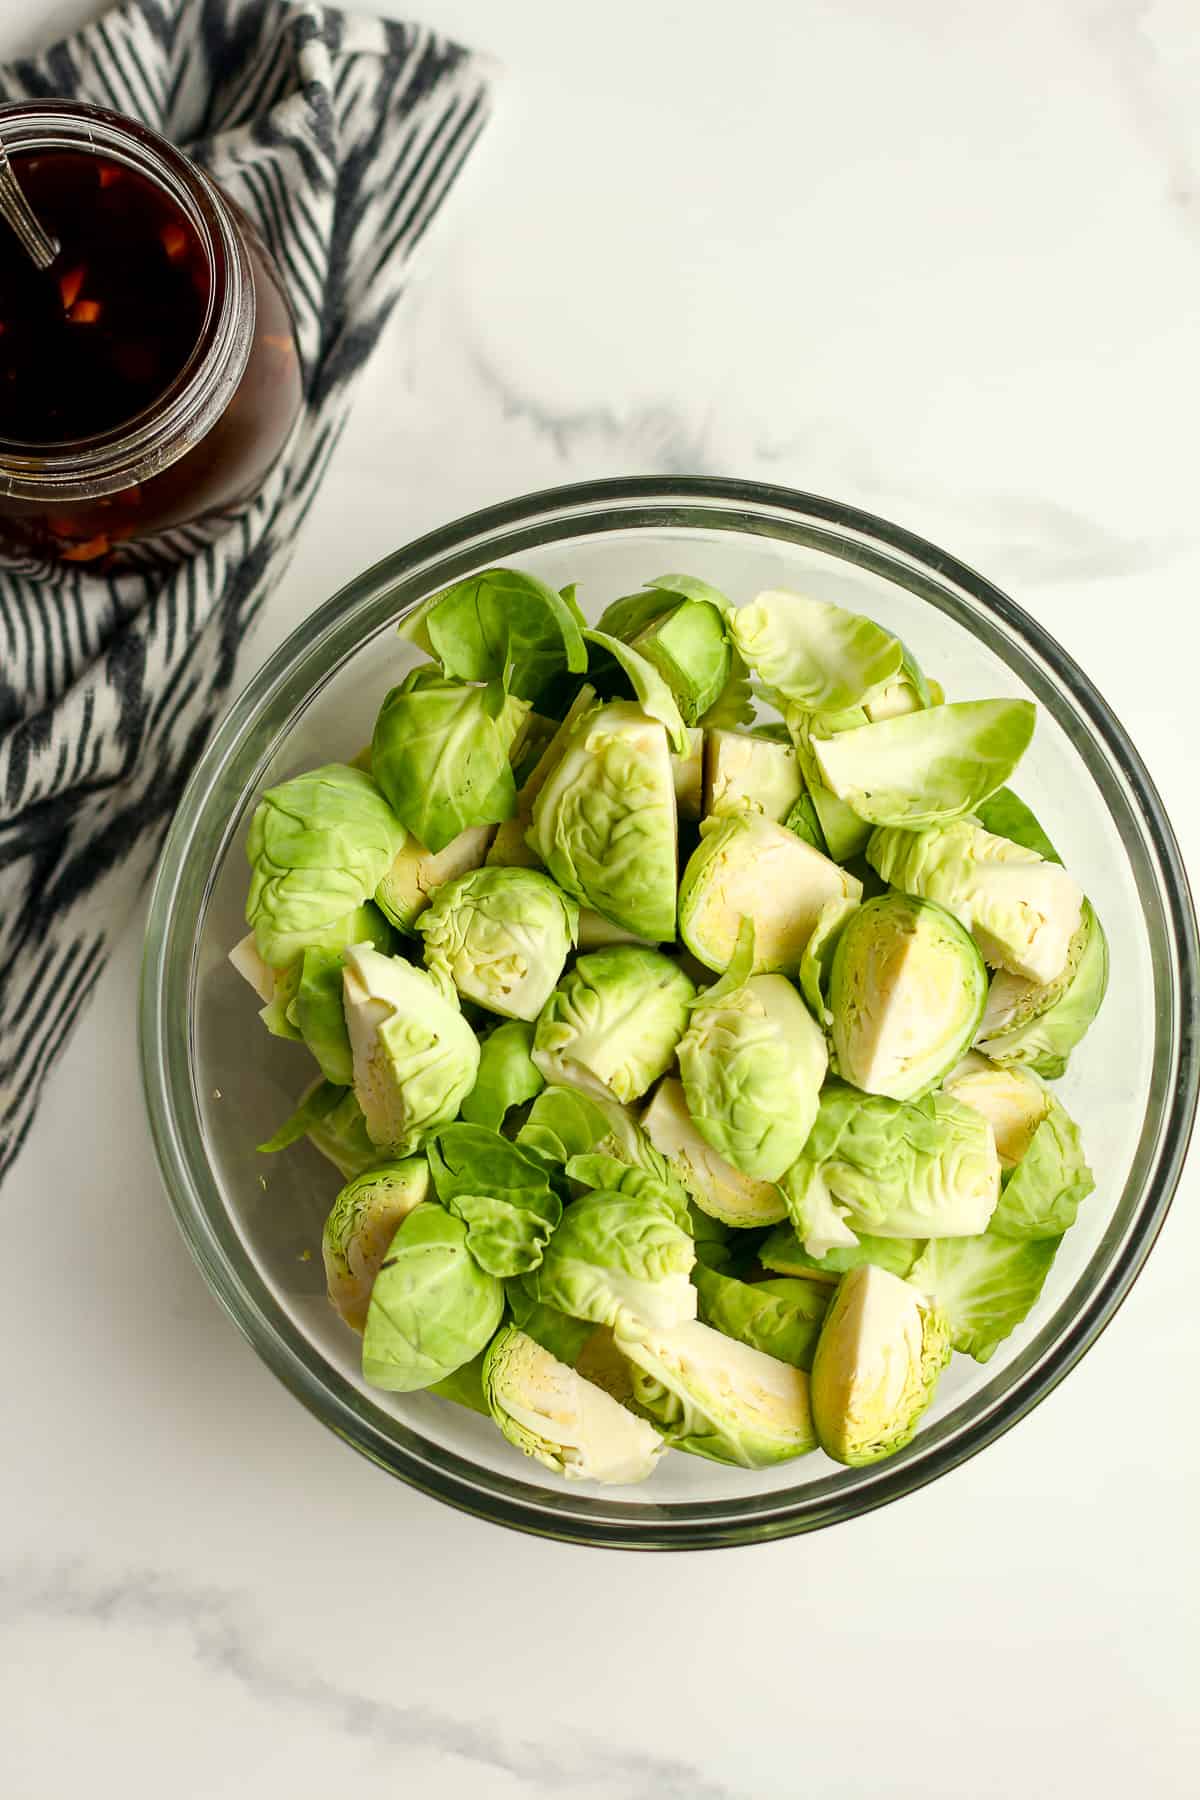 A bowl of chopped Brussel sprouts.